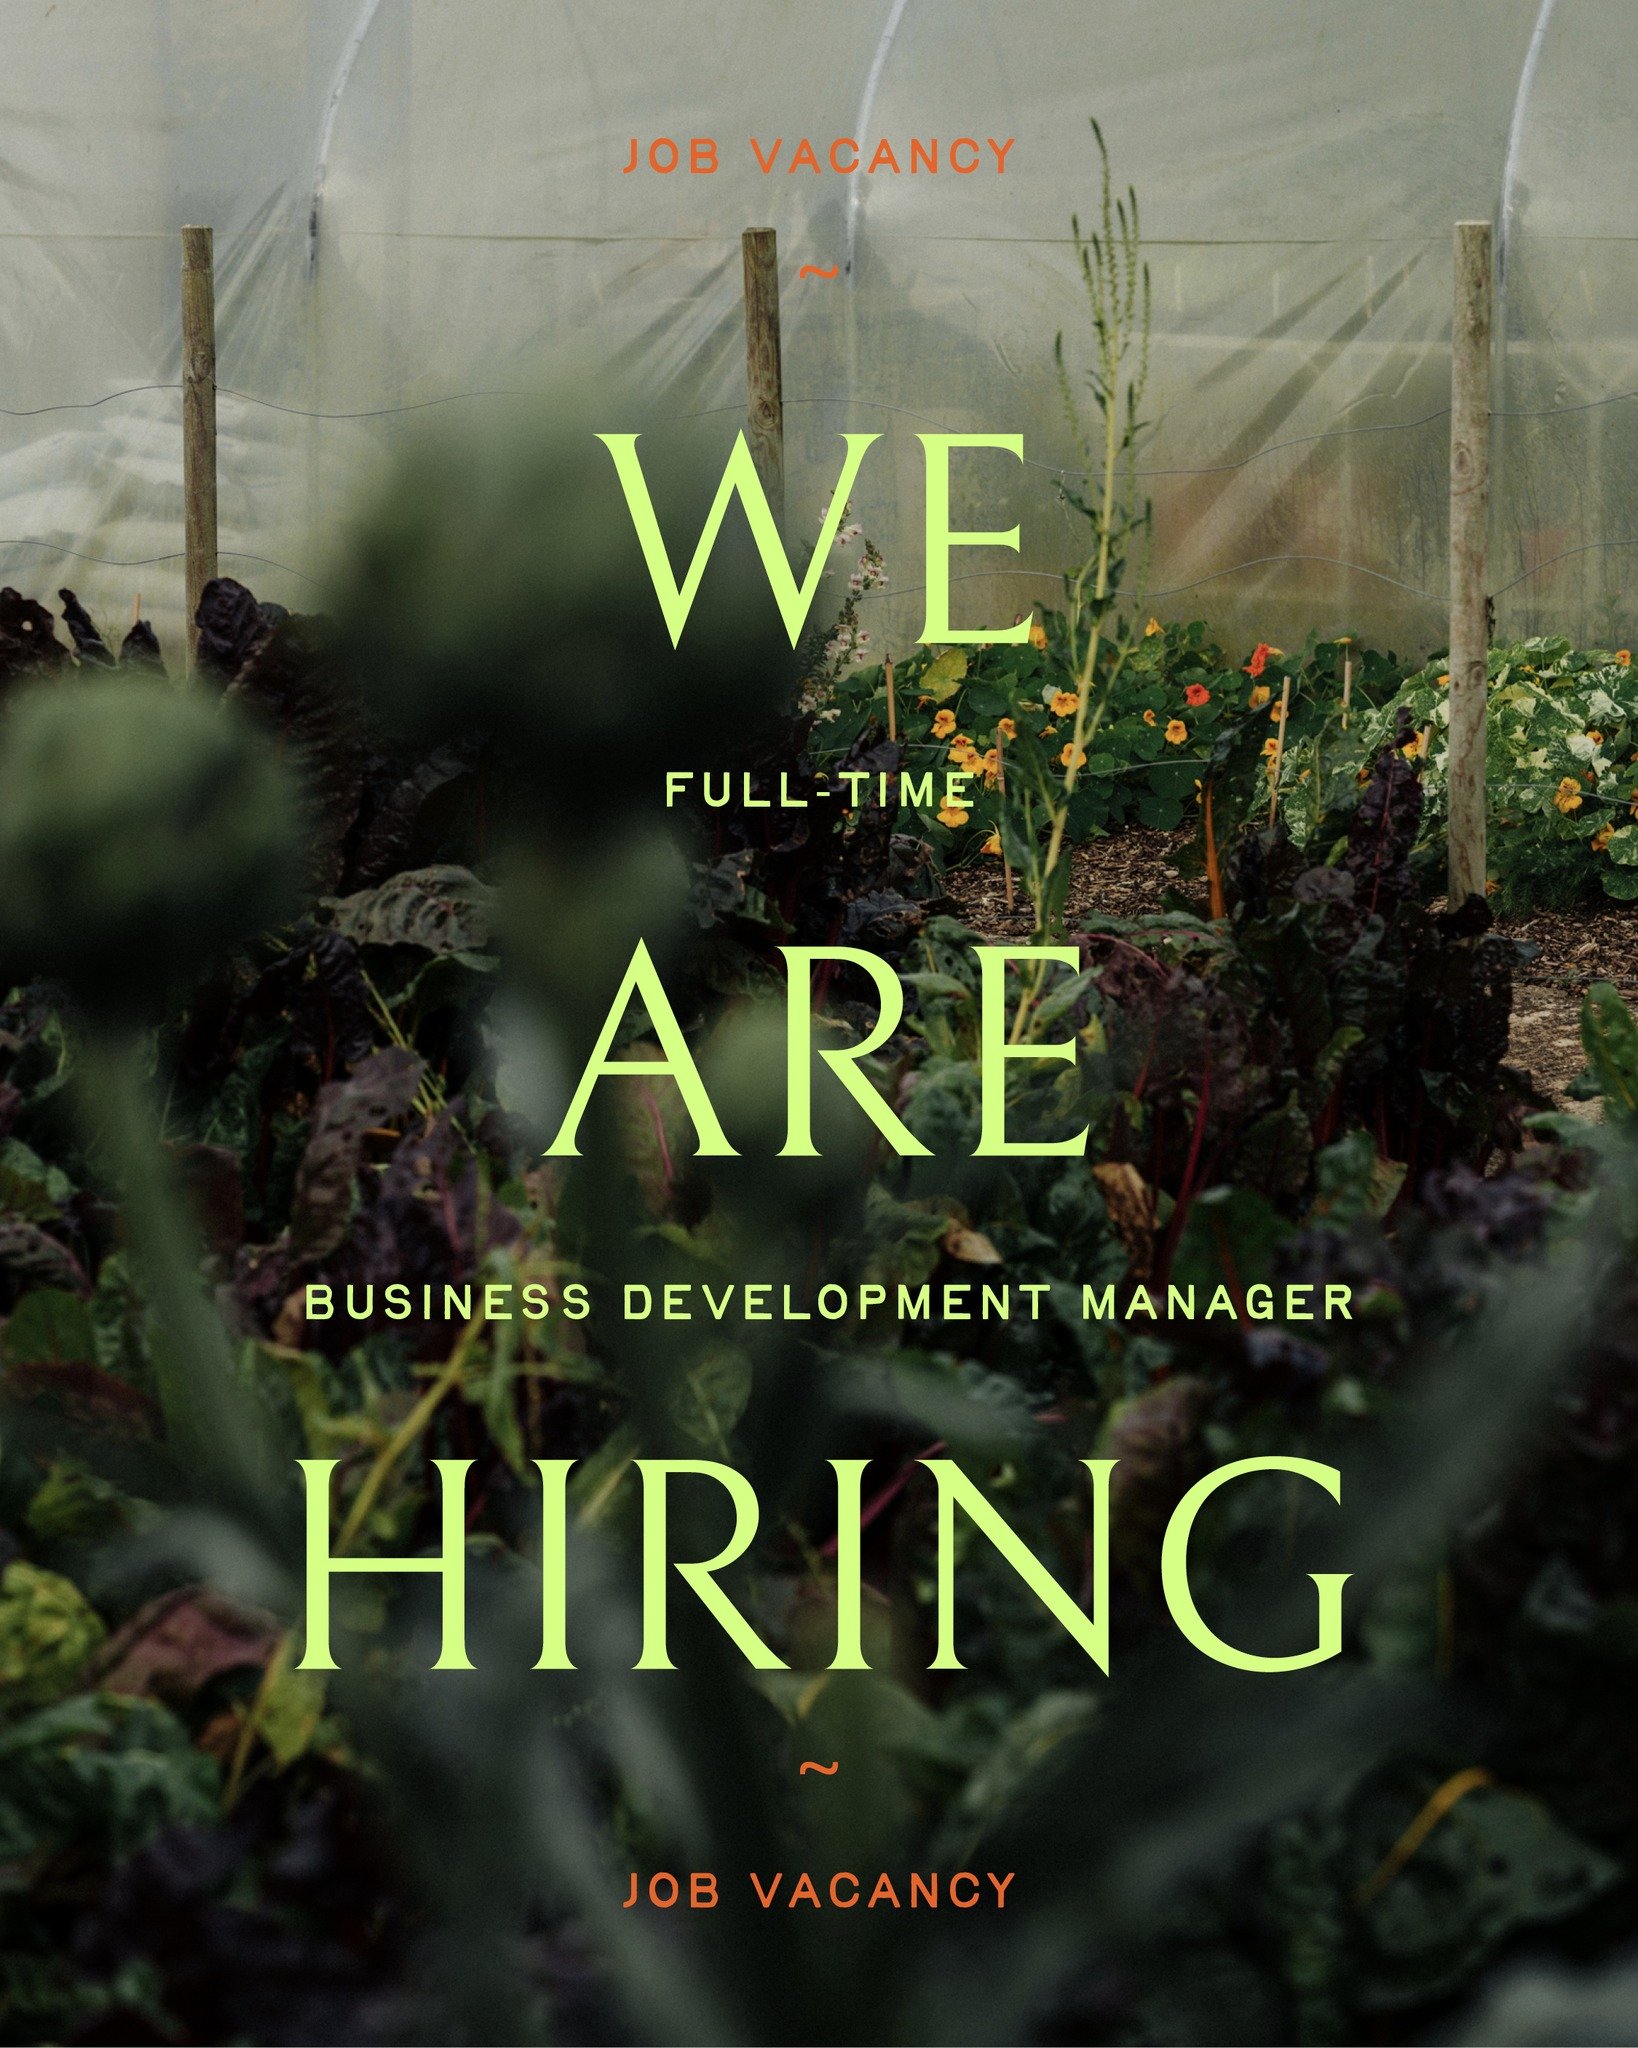 We are hiring!

Are you an excellent communicator with outstanding organisation skills? Can you increase revenue and bring in new income streams? Are you energetic with a &quot;can do&quot; attitude? If so, we want to hear from you!

Vallis Farm are 